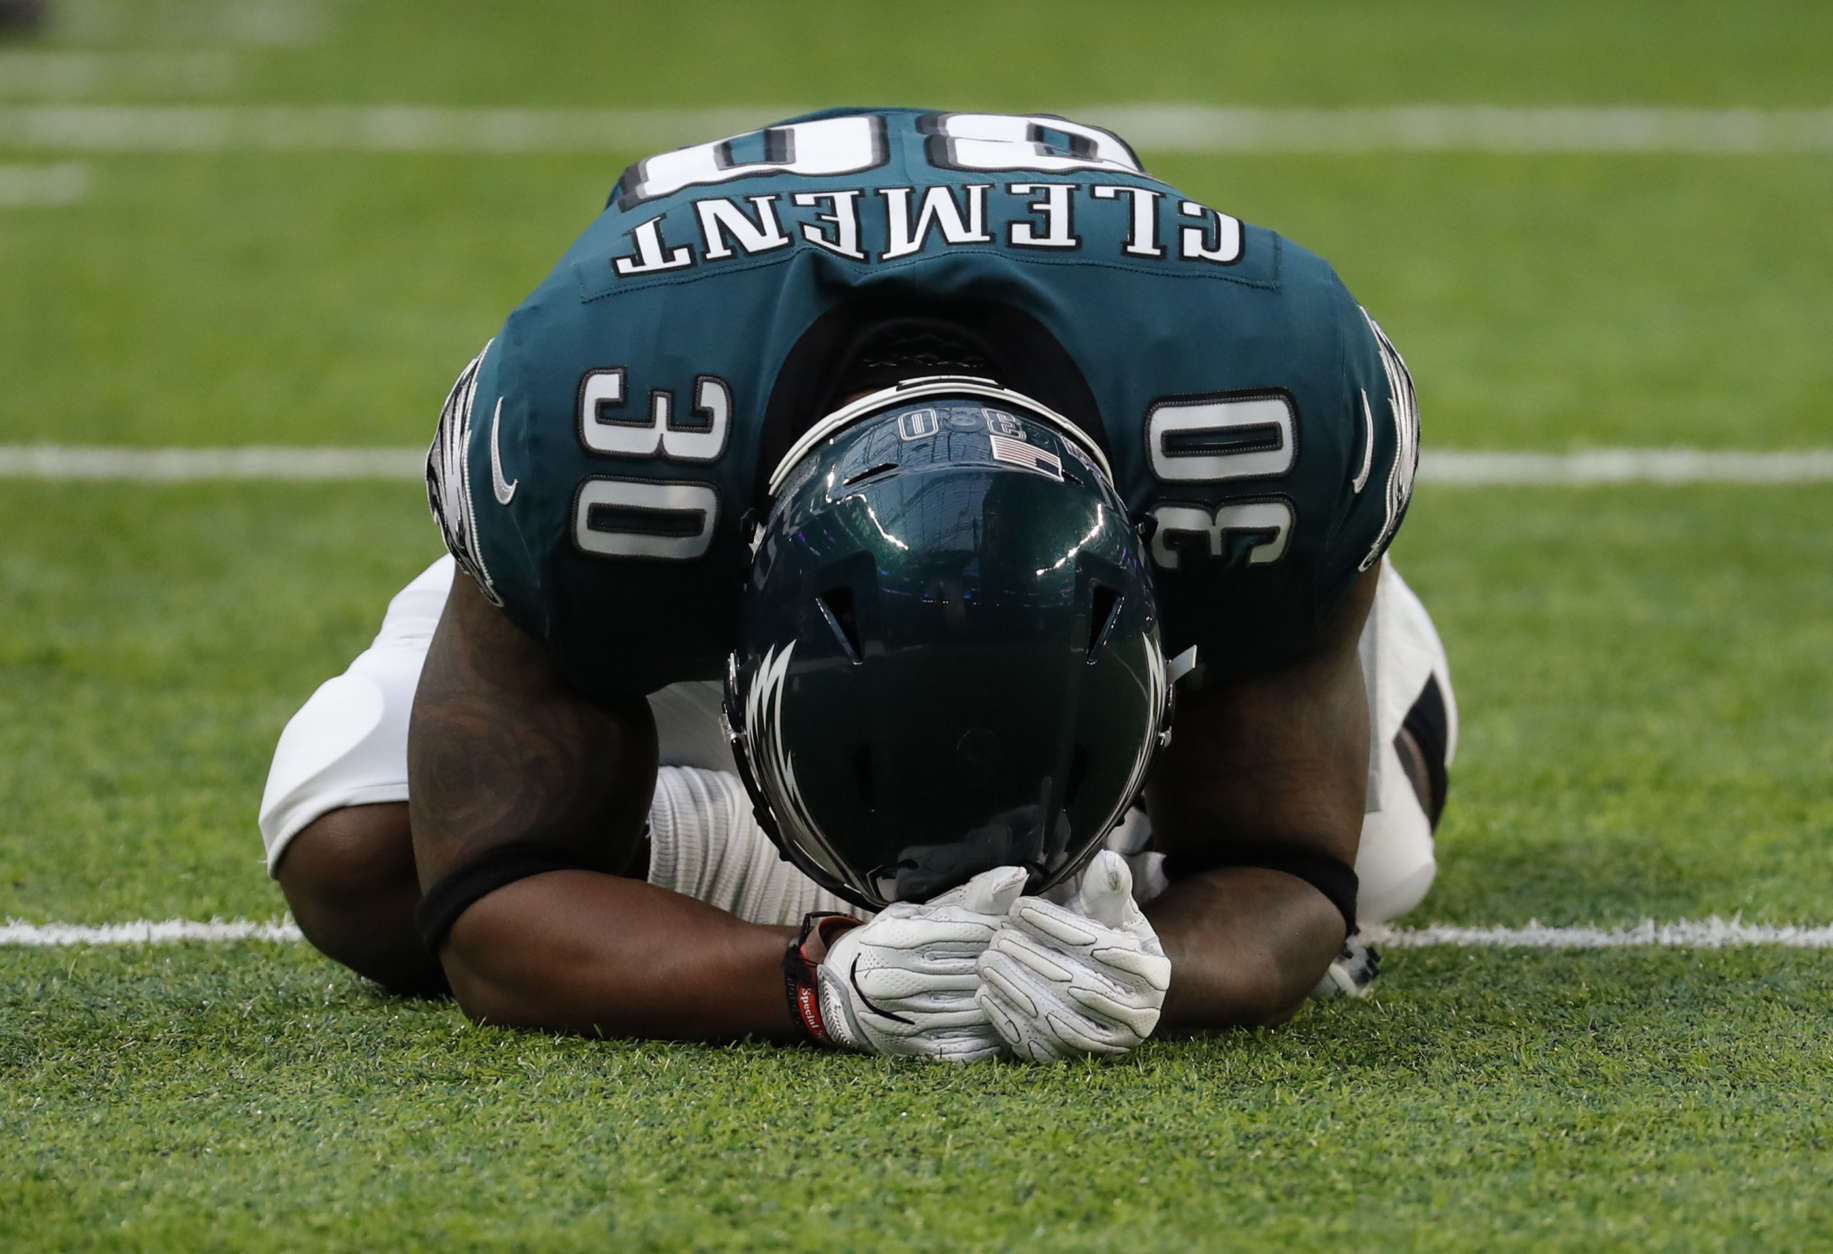 Philadelphia Eagles running back Corey Clement (30), stretches before the NFL Super Bowl 52 football game against the New England Patriots, Sunday, Feb. 4, 2018, in Minneapolis. (AP Photo/Charlie Neibergall)